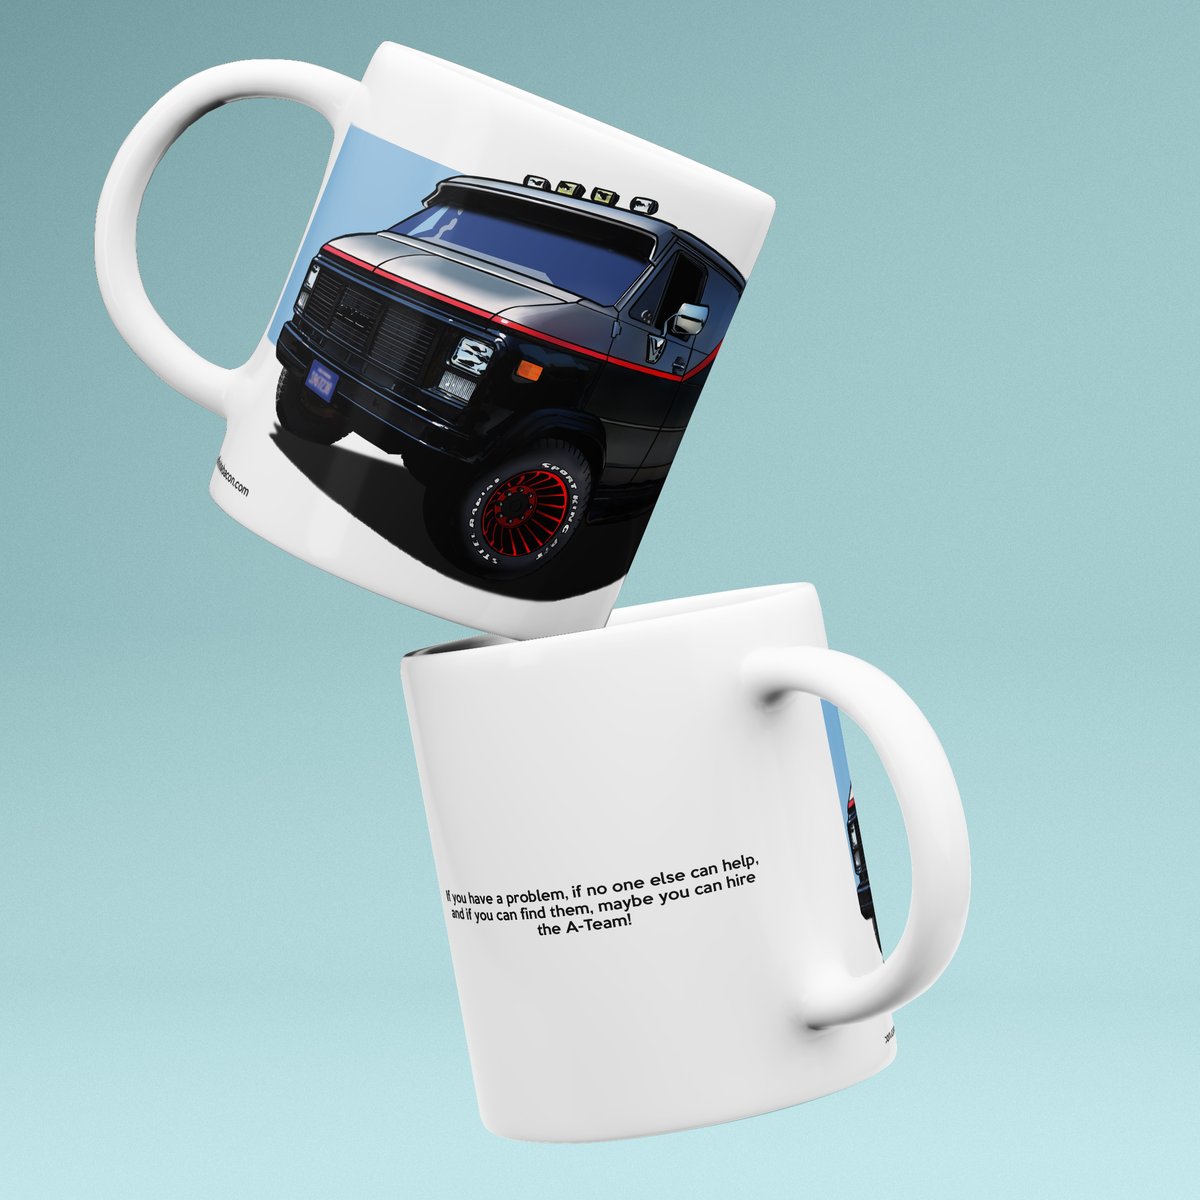 I've popped some new mugs up in my shop. You can get one here: infinitebacon.com/mugs